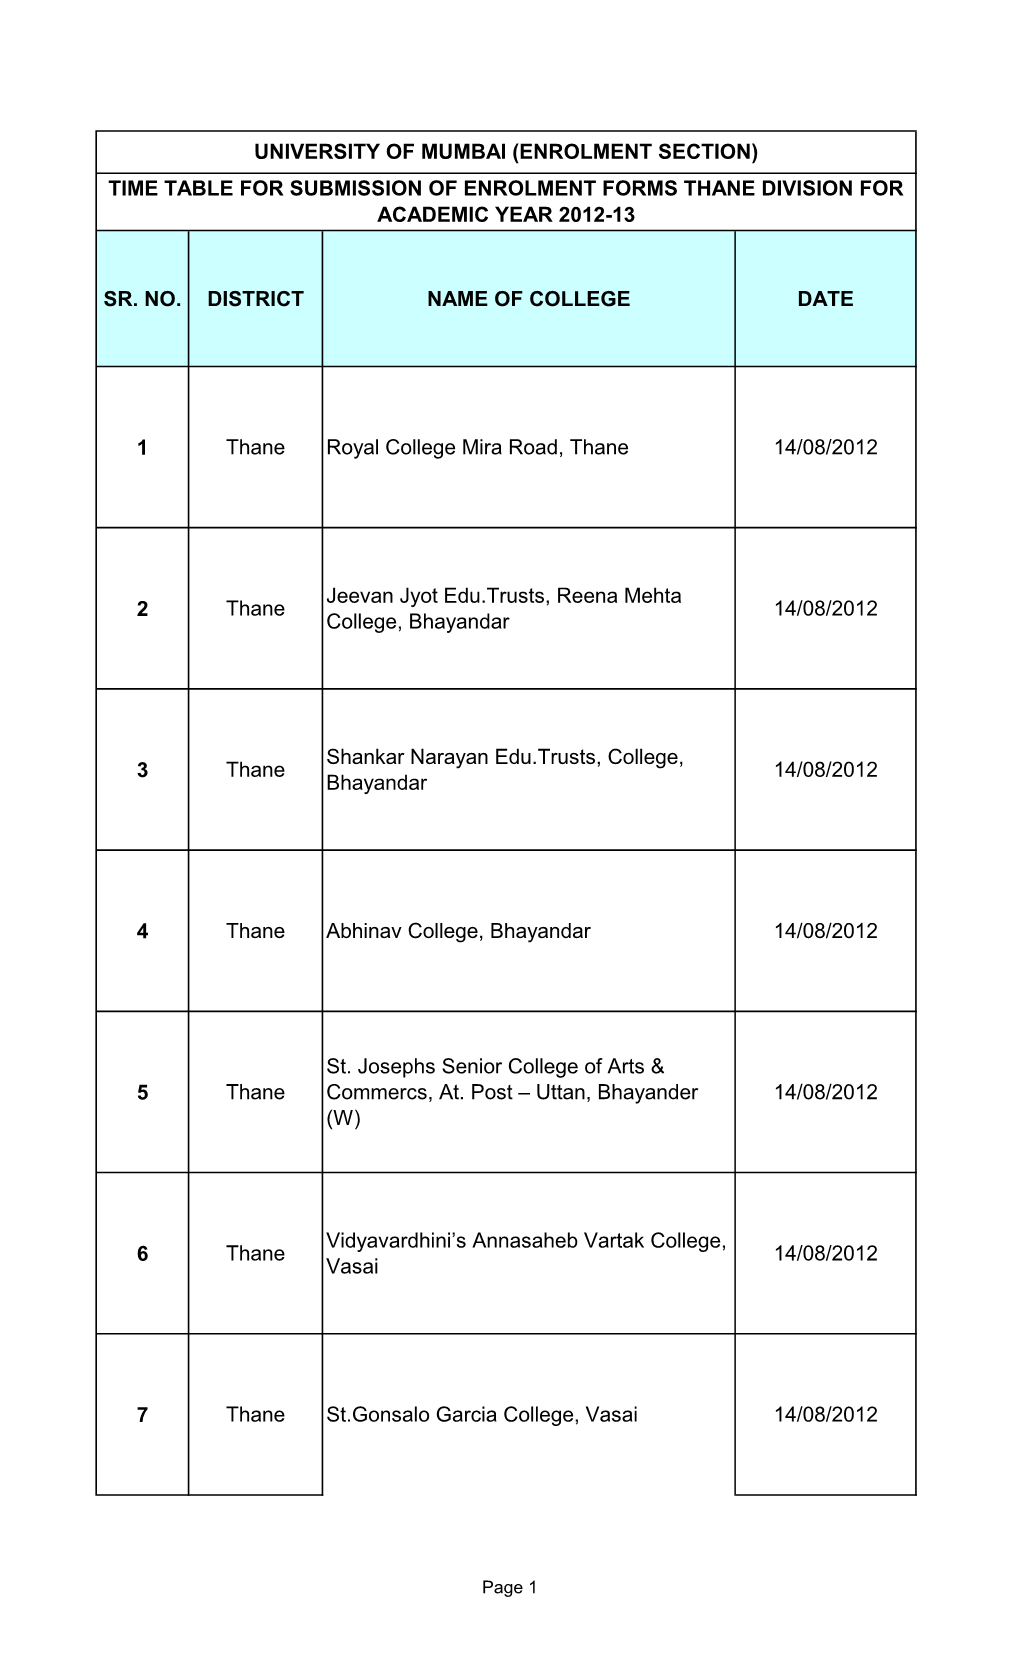 Thane Division for Academic Year 2012-13